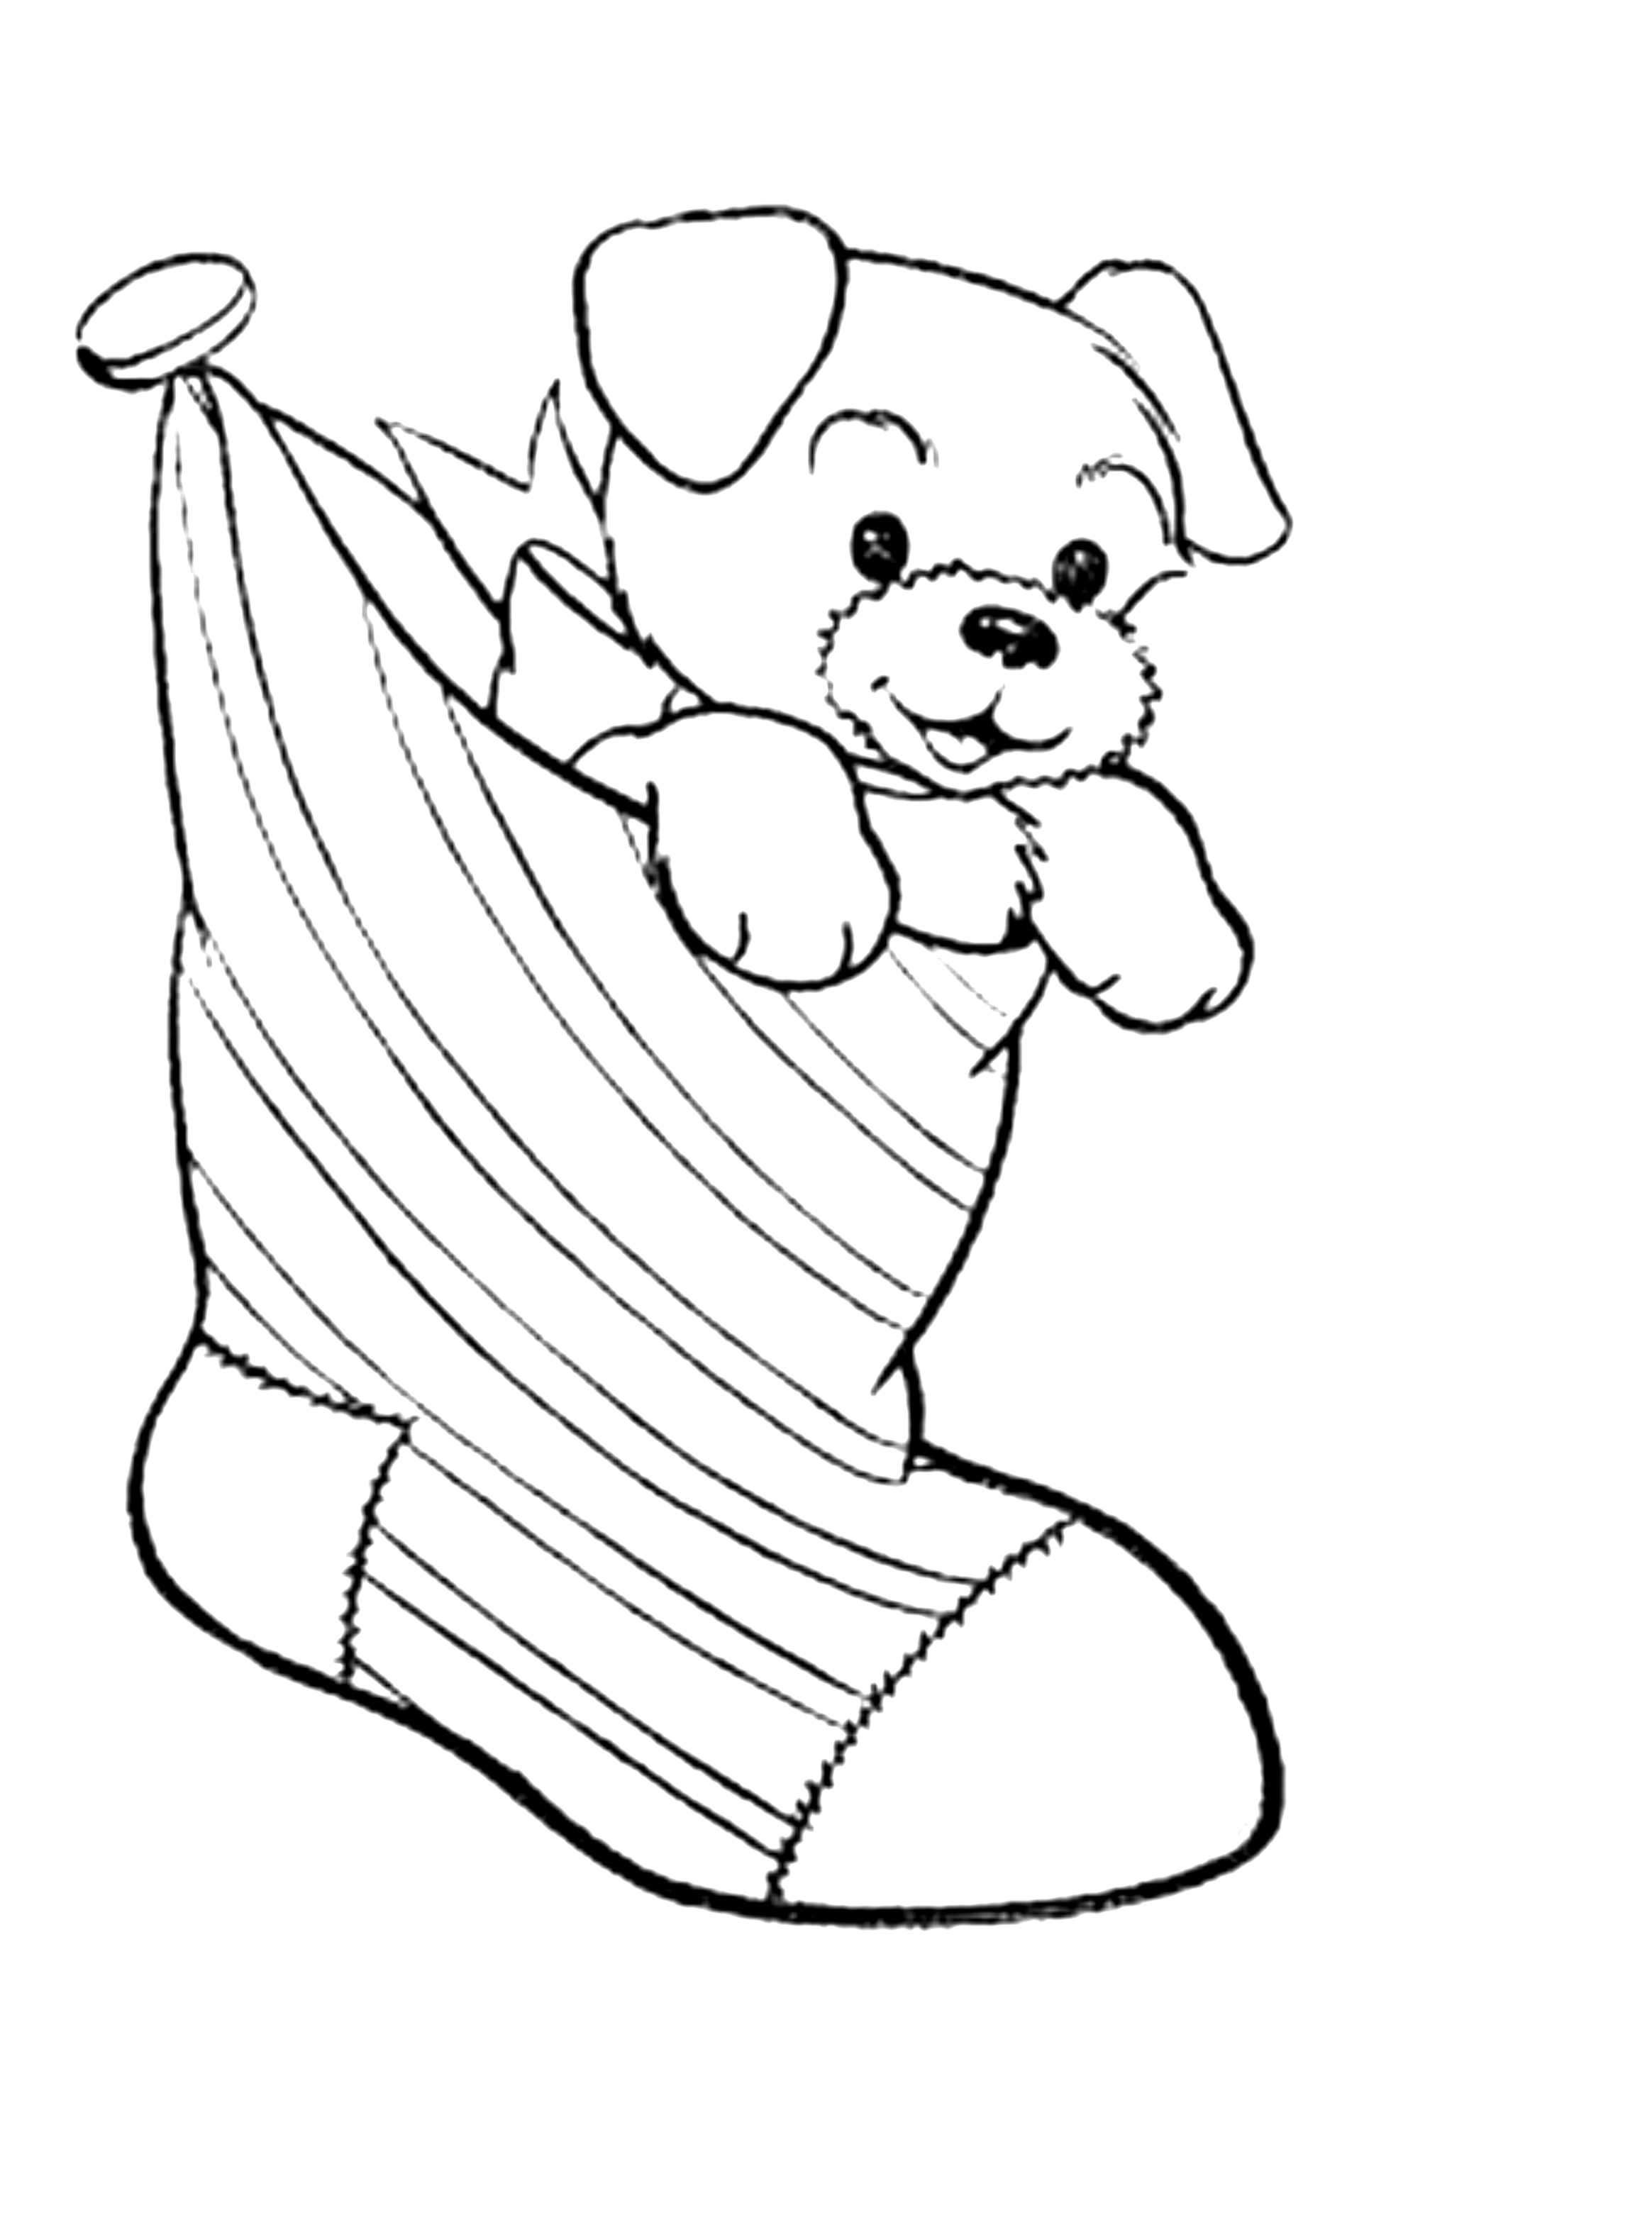 Free Puppy Coloring Pages